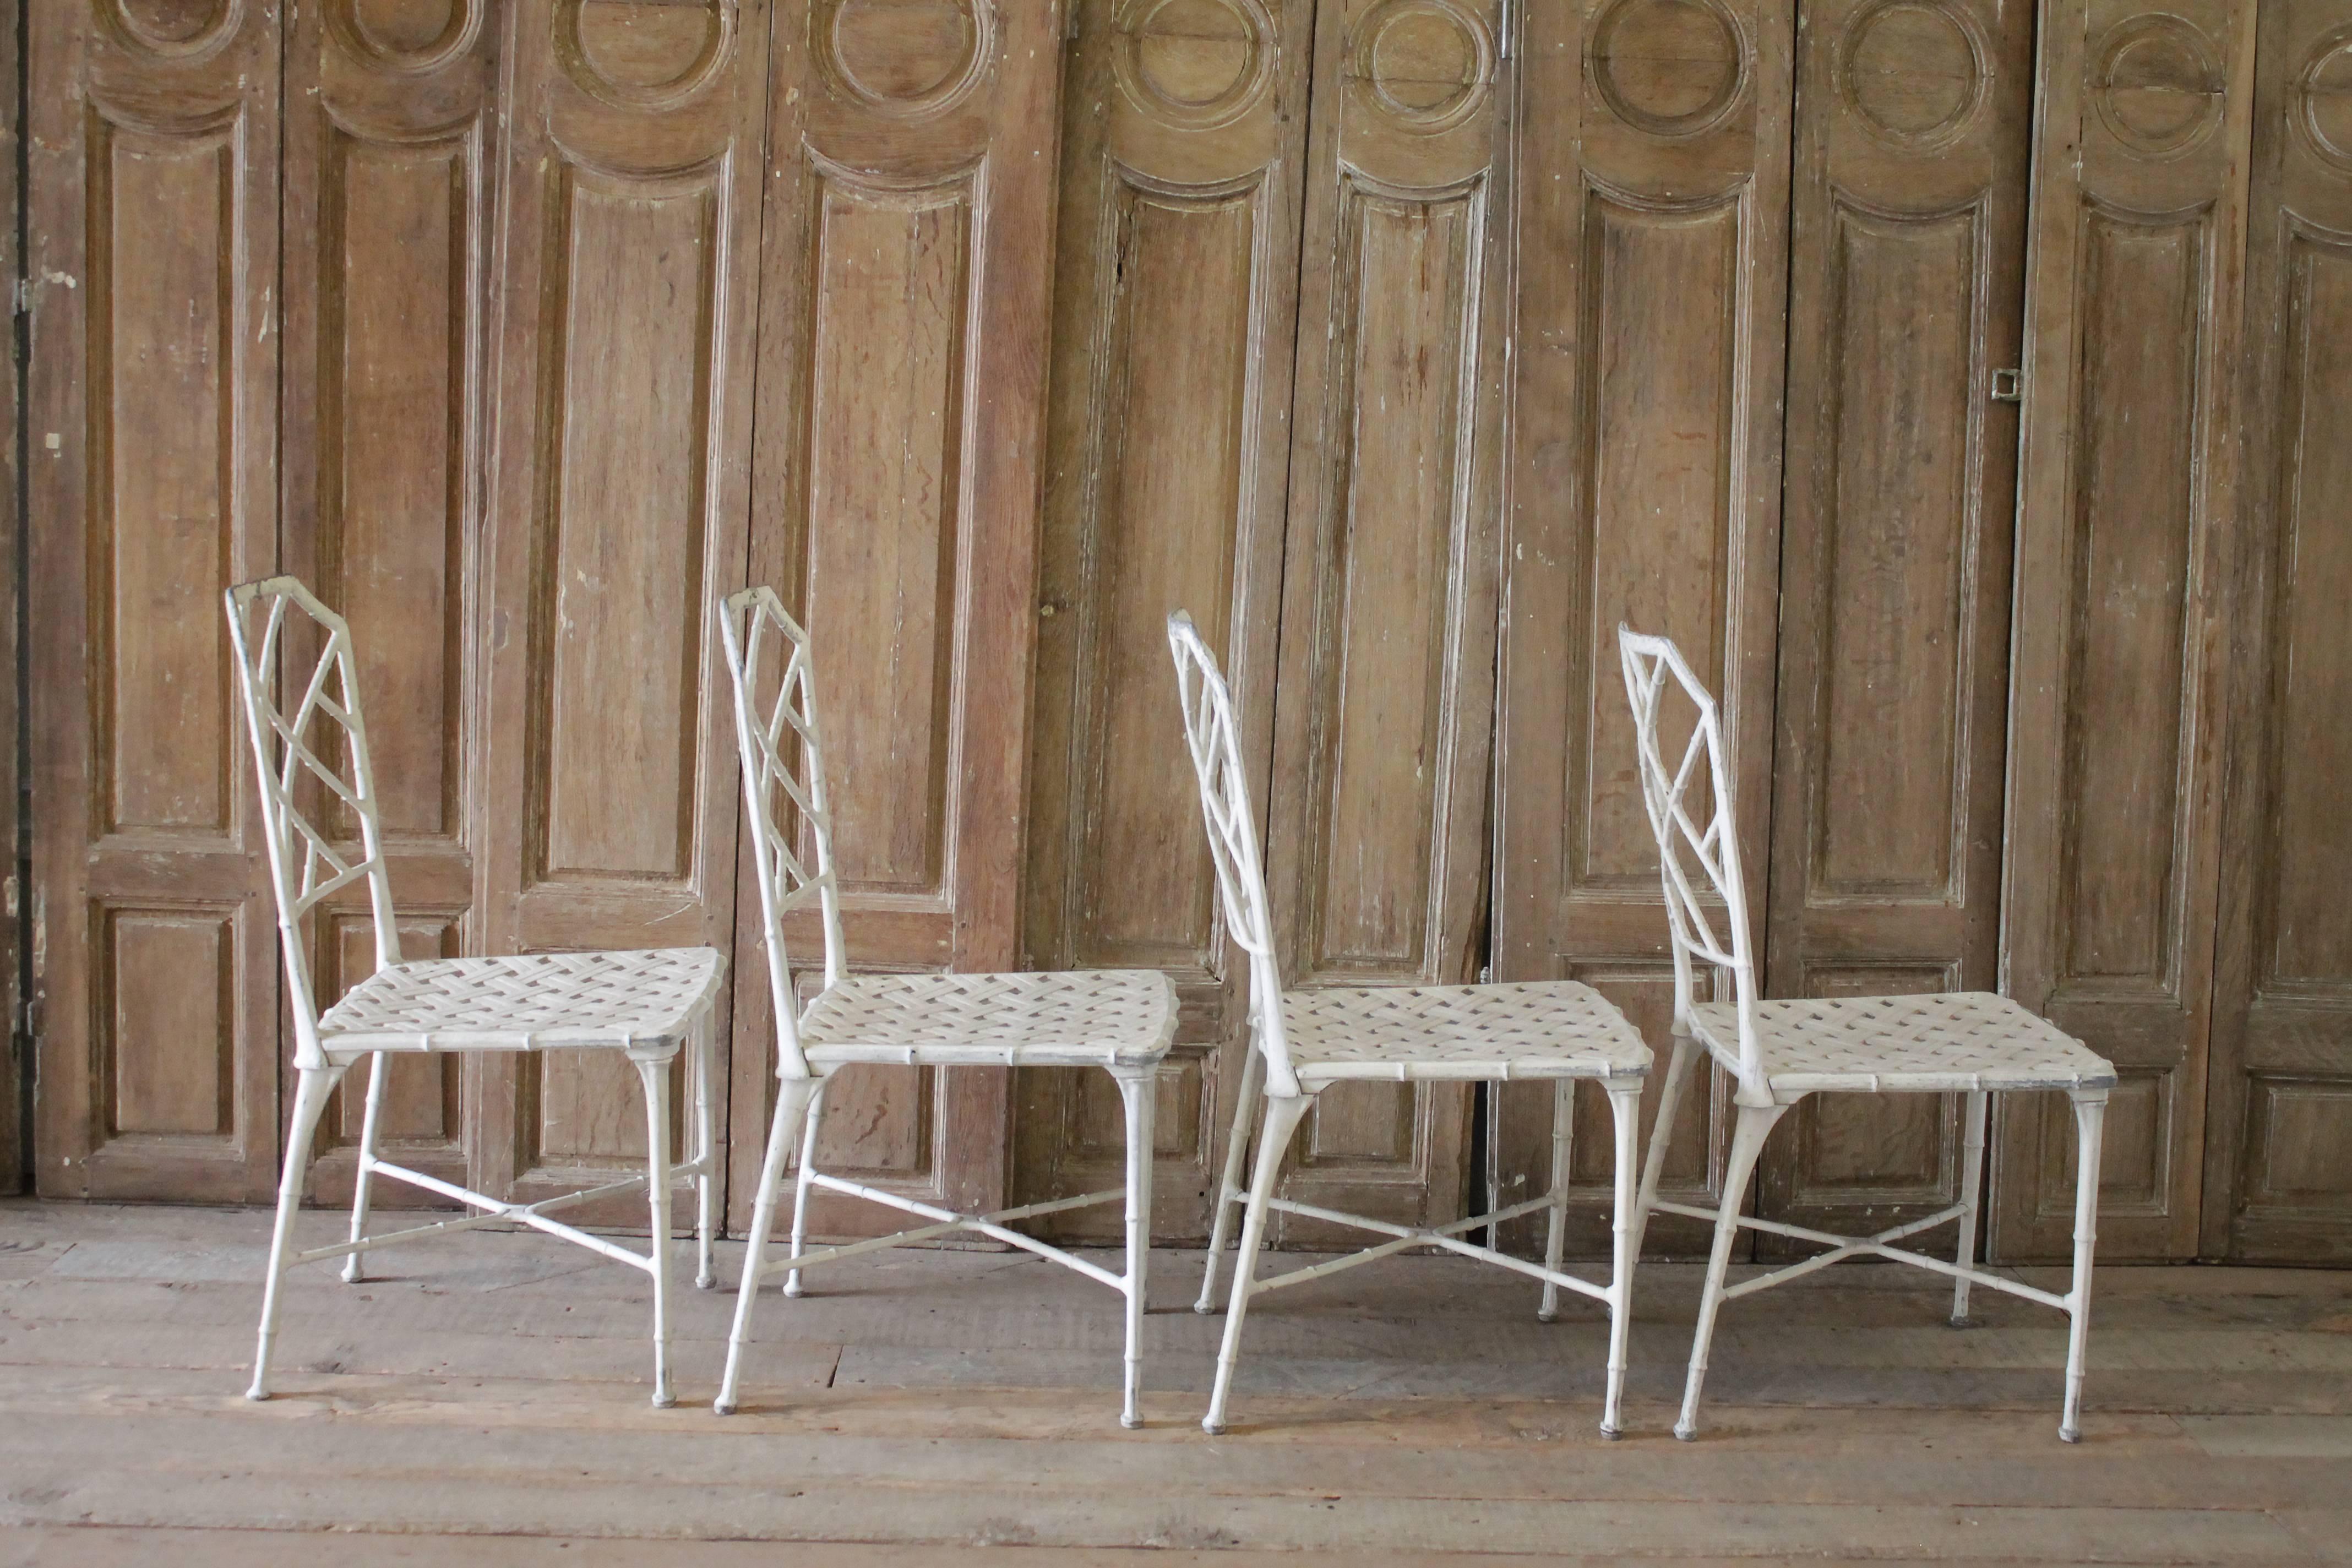 Vintage faux bamboo brown Jordan Calcutta metal Chippendale style chairs lattice cross chinoiserie Hollywood regency indoor outdoor patio furniture white with no cushions.

Four-piece set. Cast in solid aluminium this set is stout and heavy not